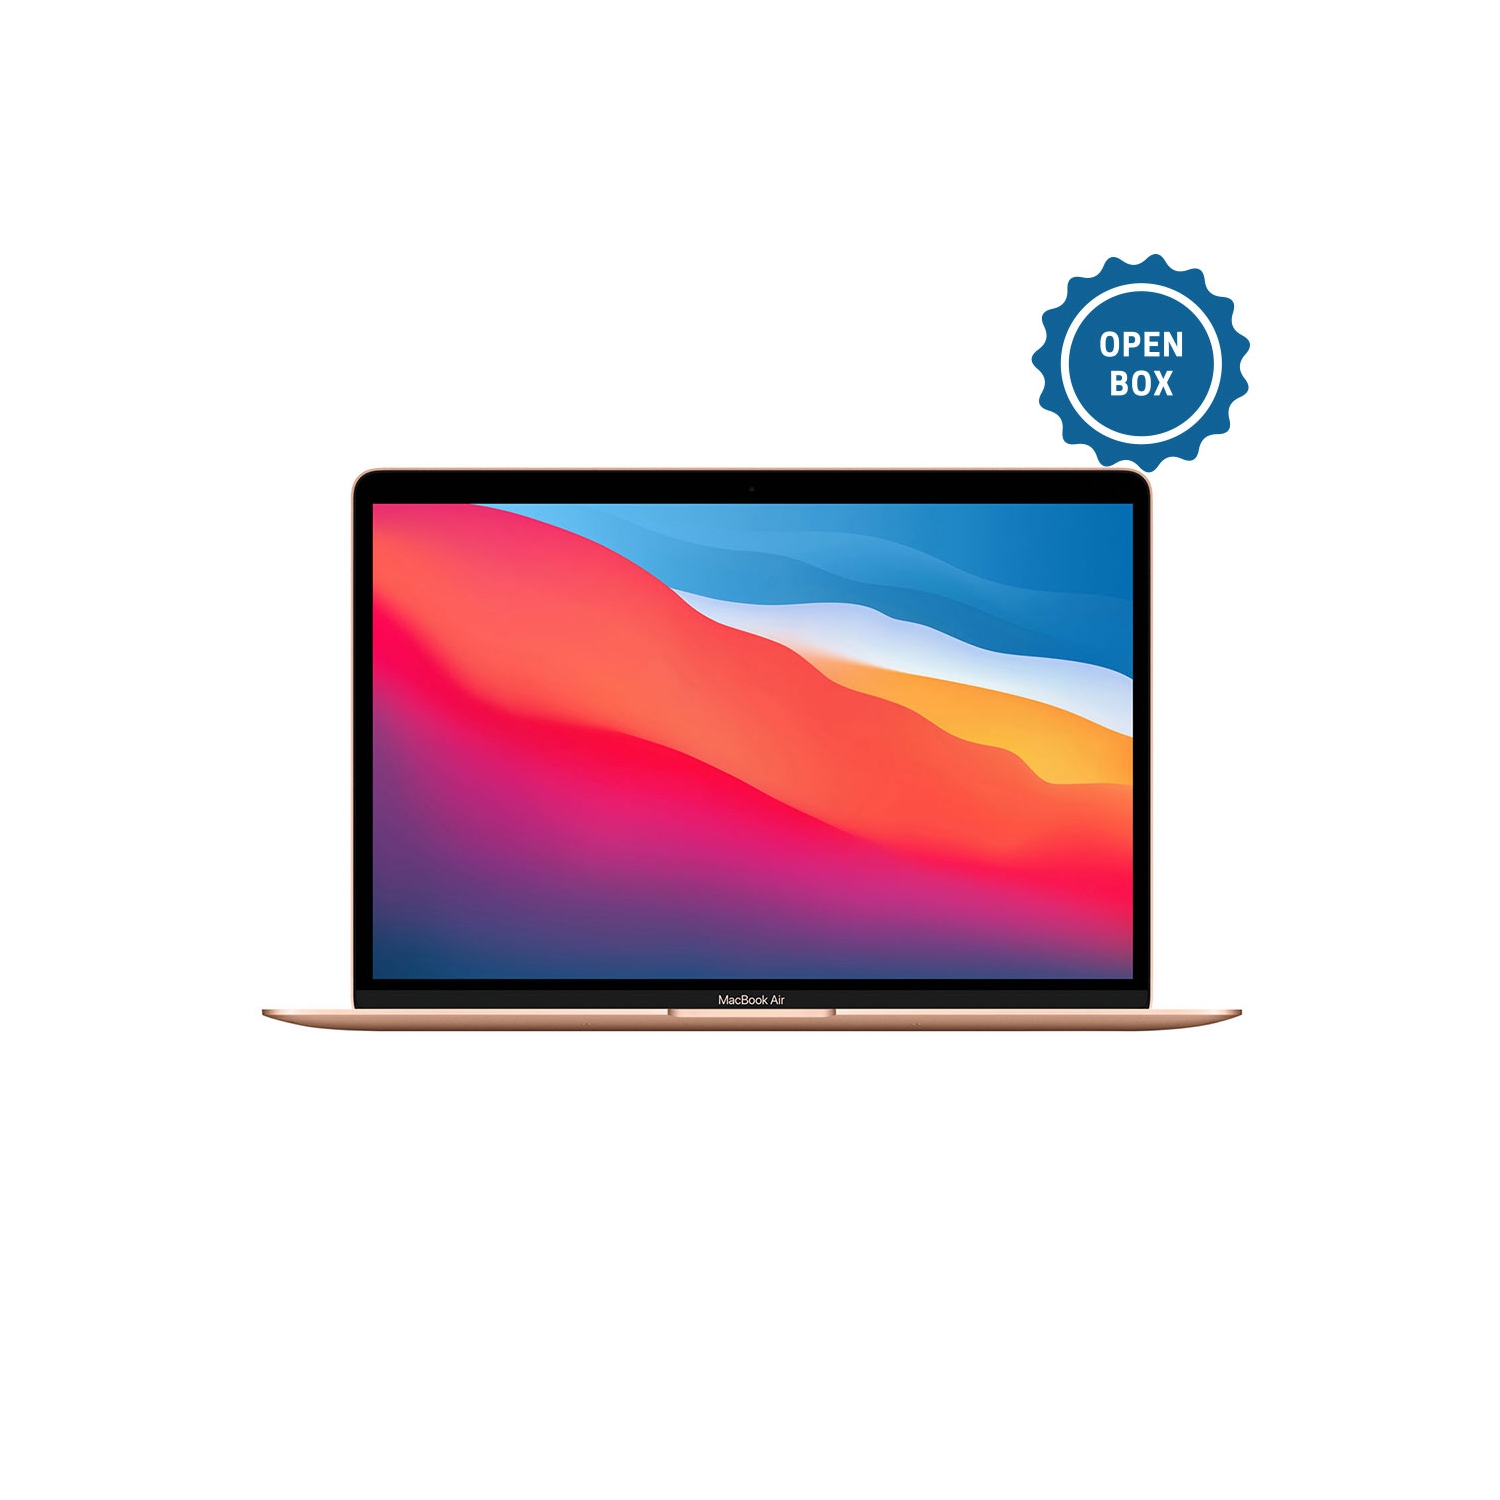 Apple MacBook Air 13.3" with Touch ID (Fall 2020) (Apple M1 Chip / 8GB RAM / 256GB SSD / Gold) English - Open Box